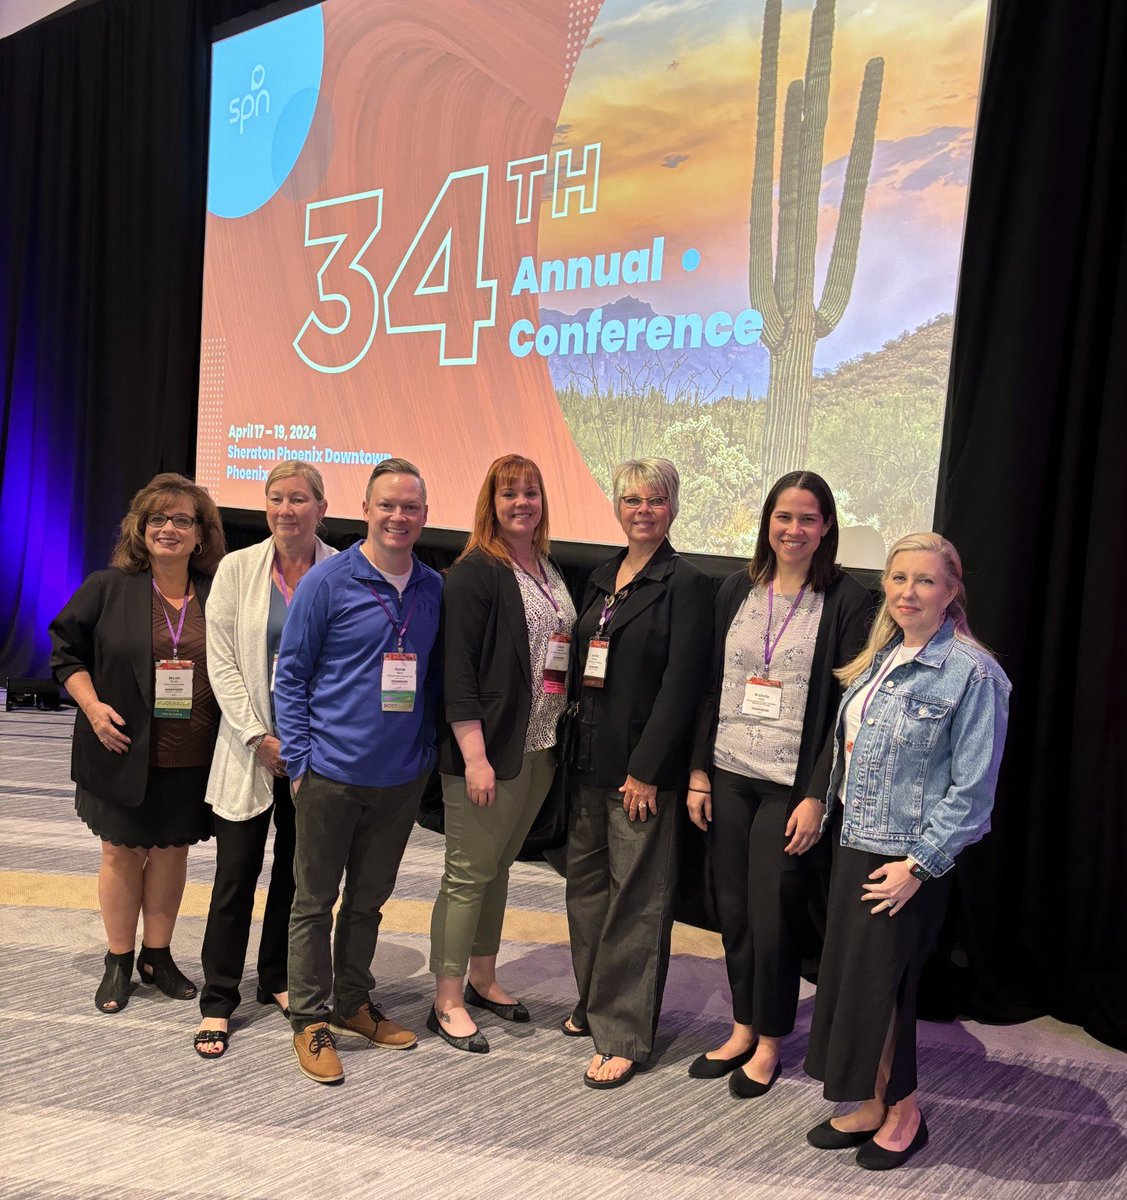 A big thank you to the #SPN24 Program Planning Committee for their hard work in developing such a memorable conference! #ProudPediatricNurse #PediatricNursingExcellence